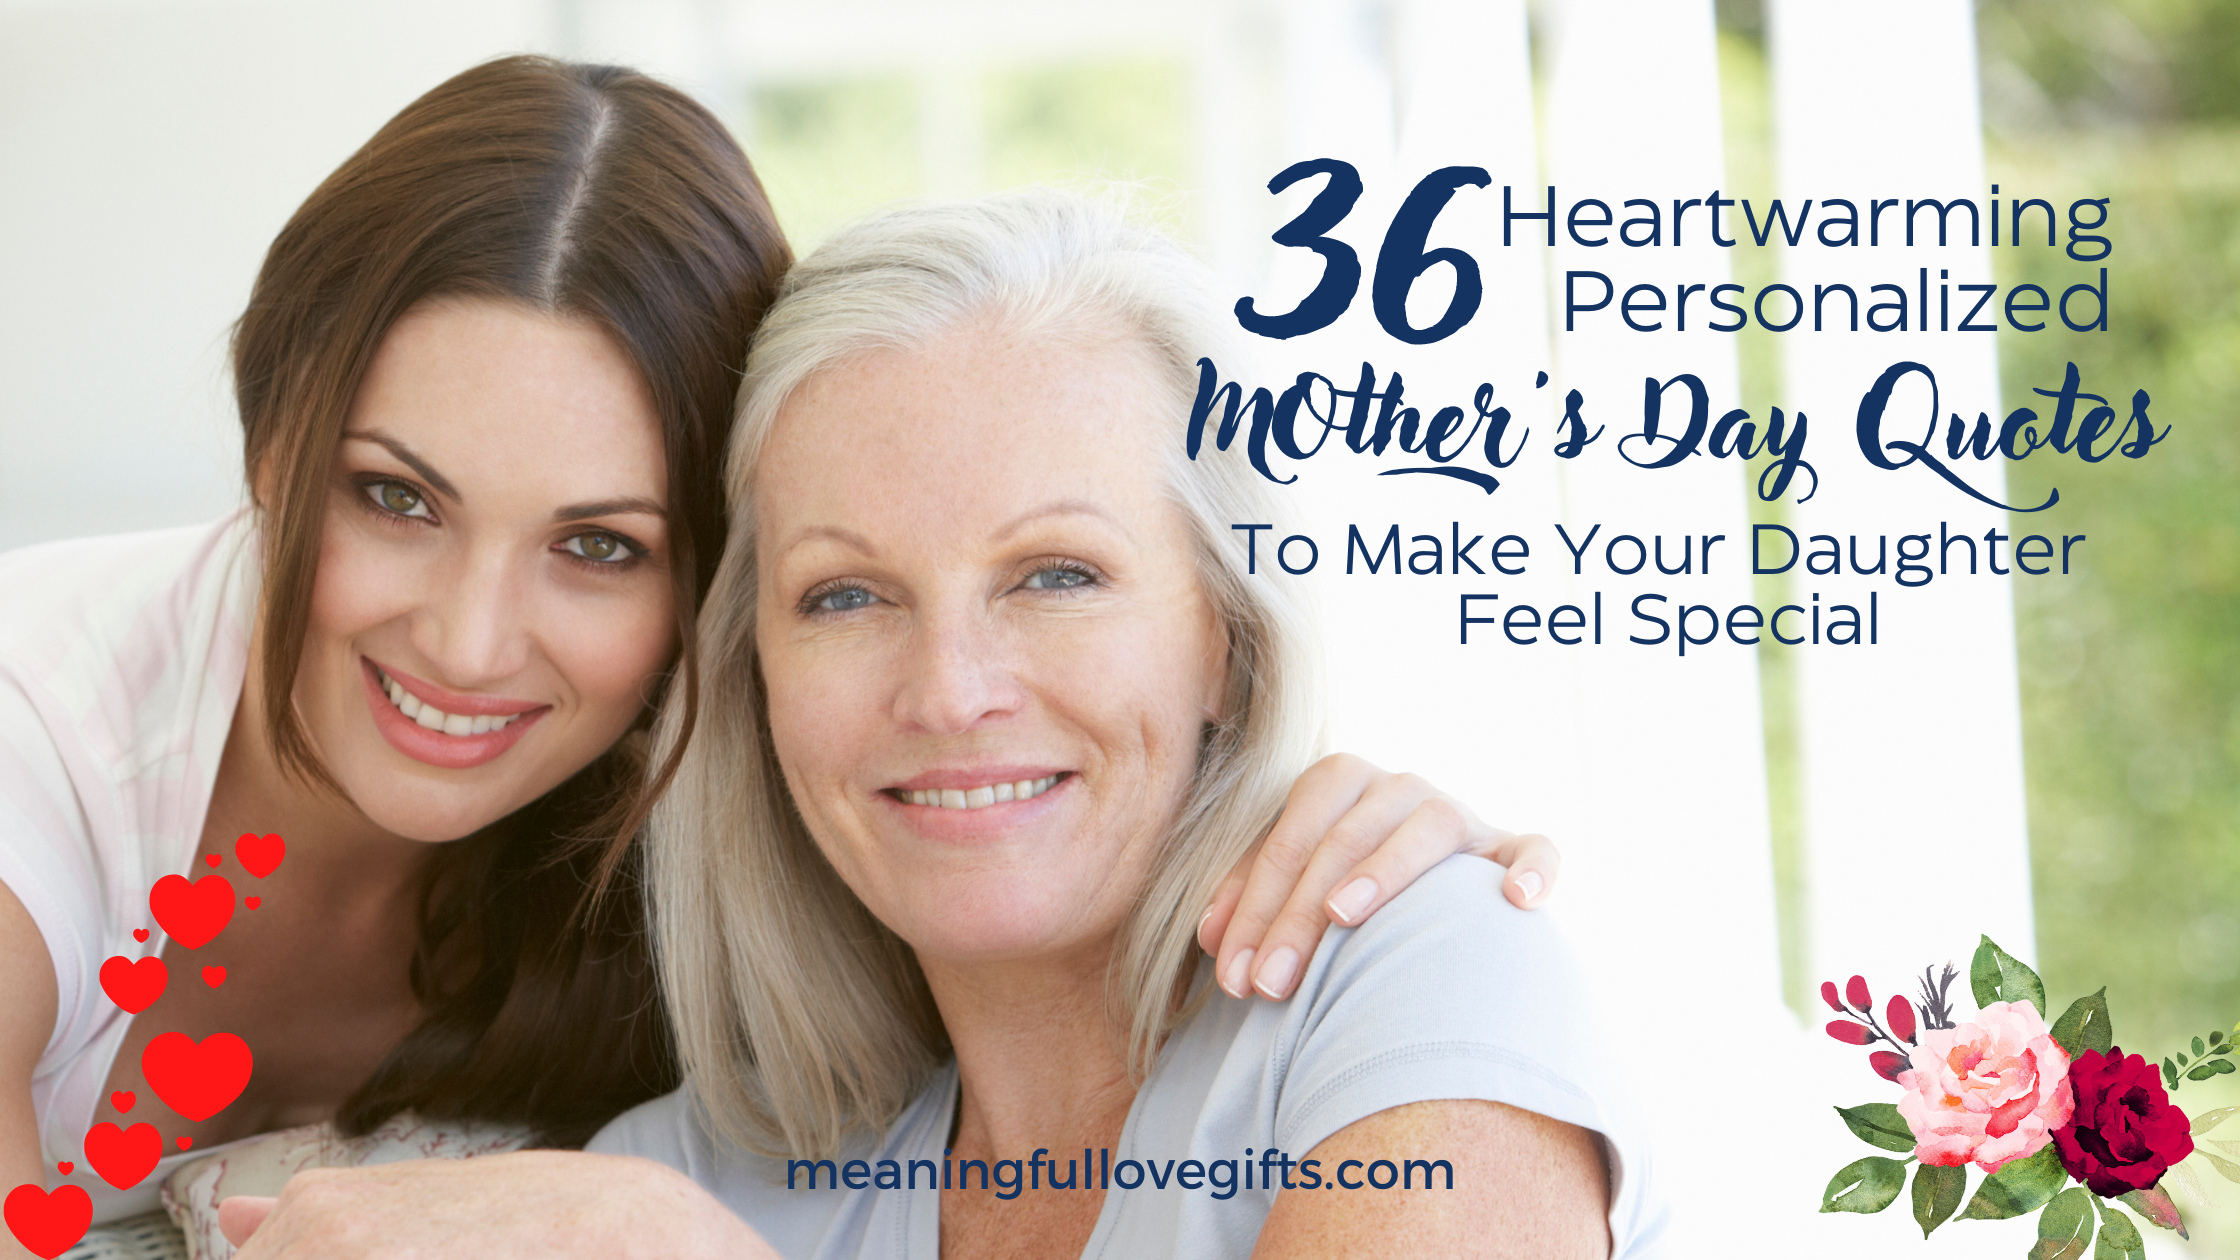 80 Best Mother's Day Quotes - Inspiring Quotes About Moms